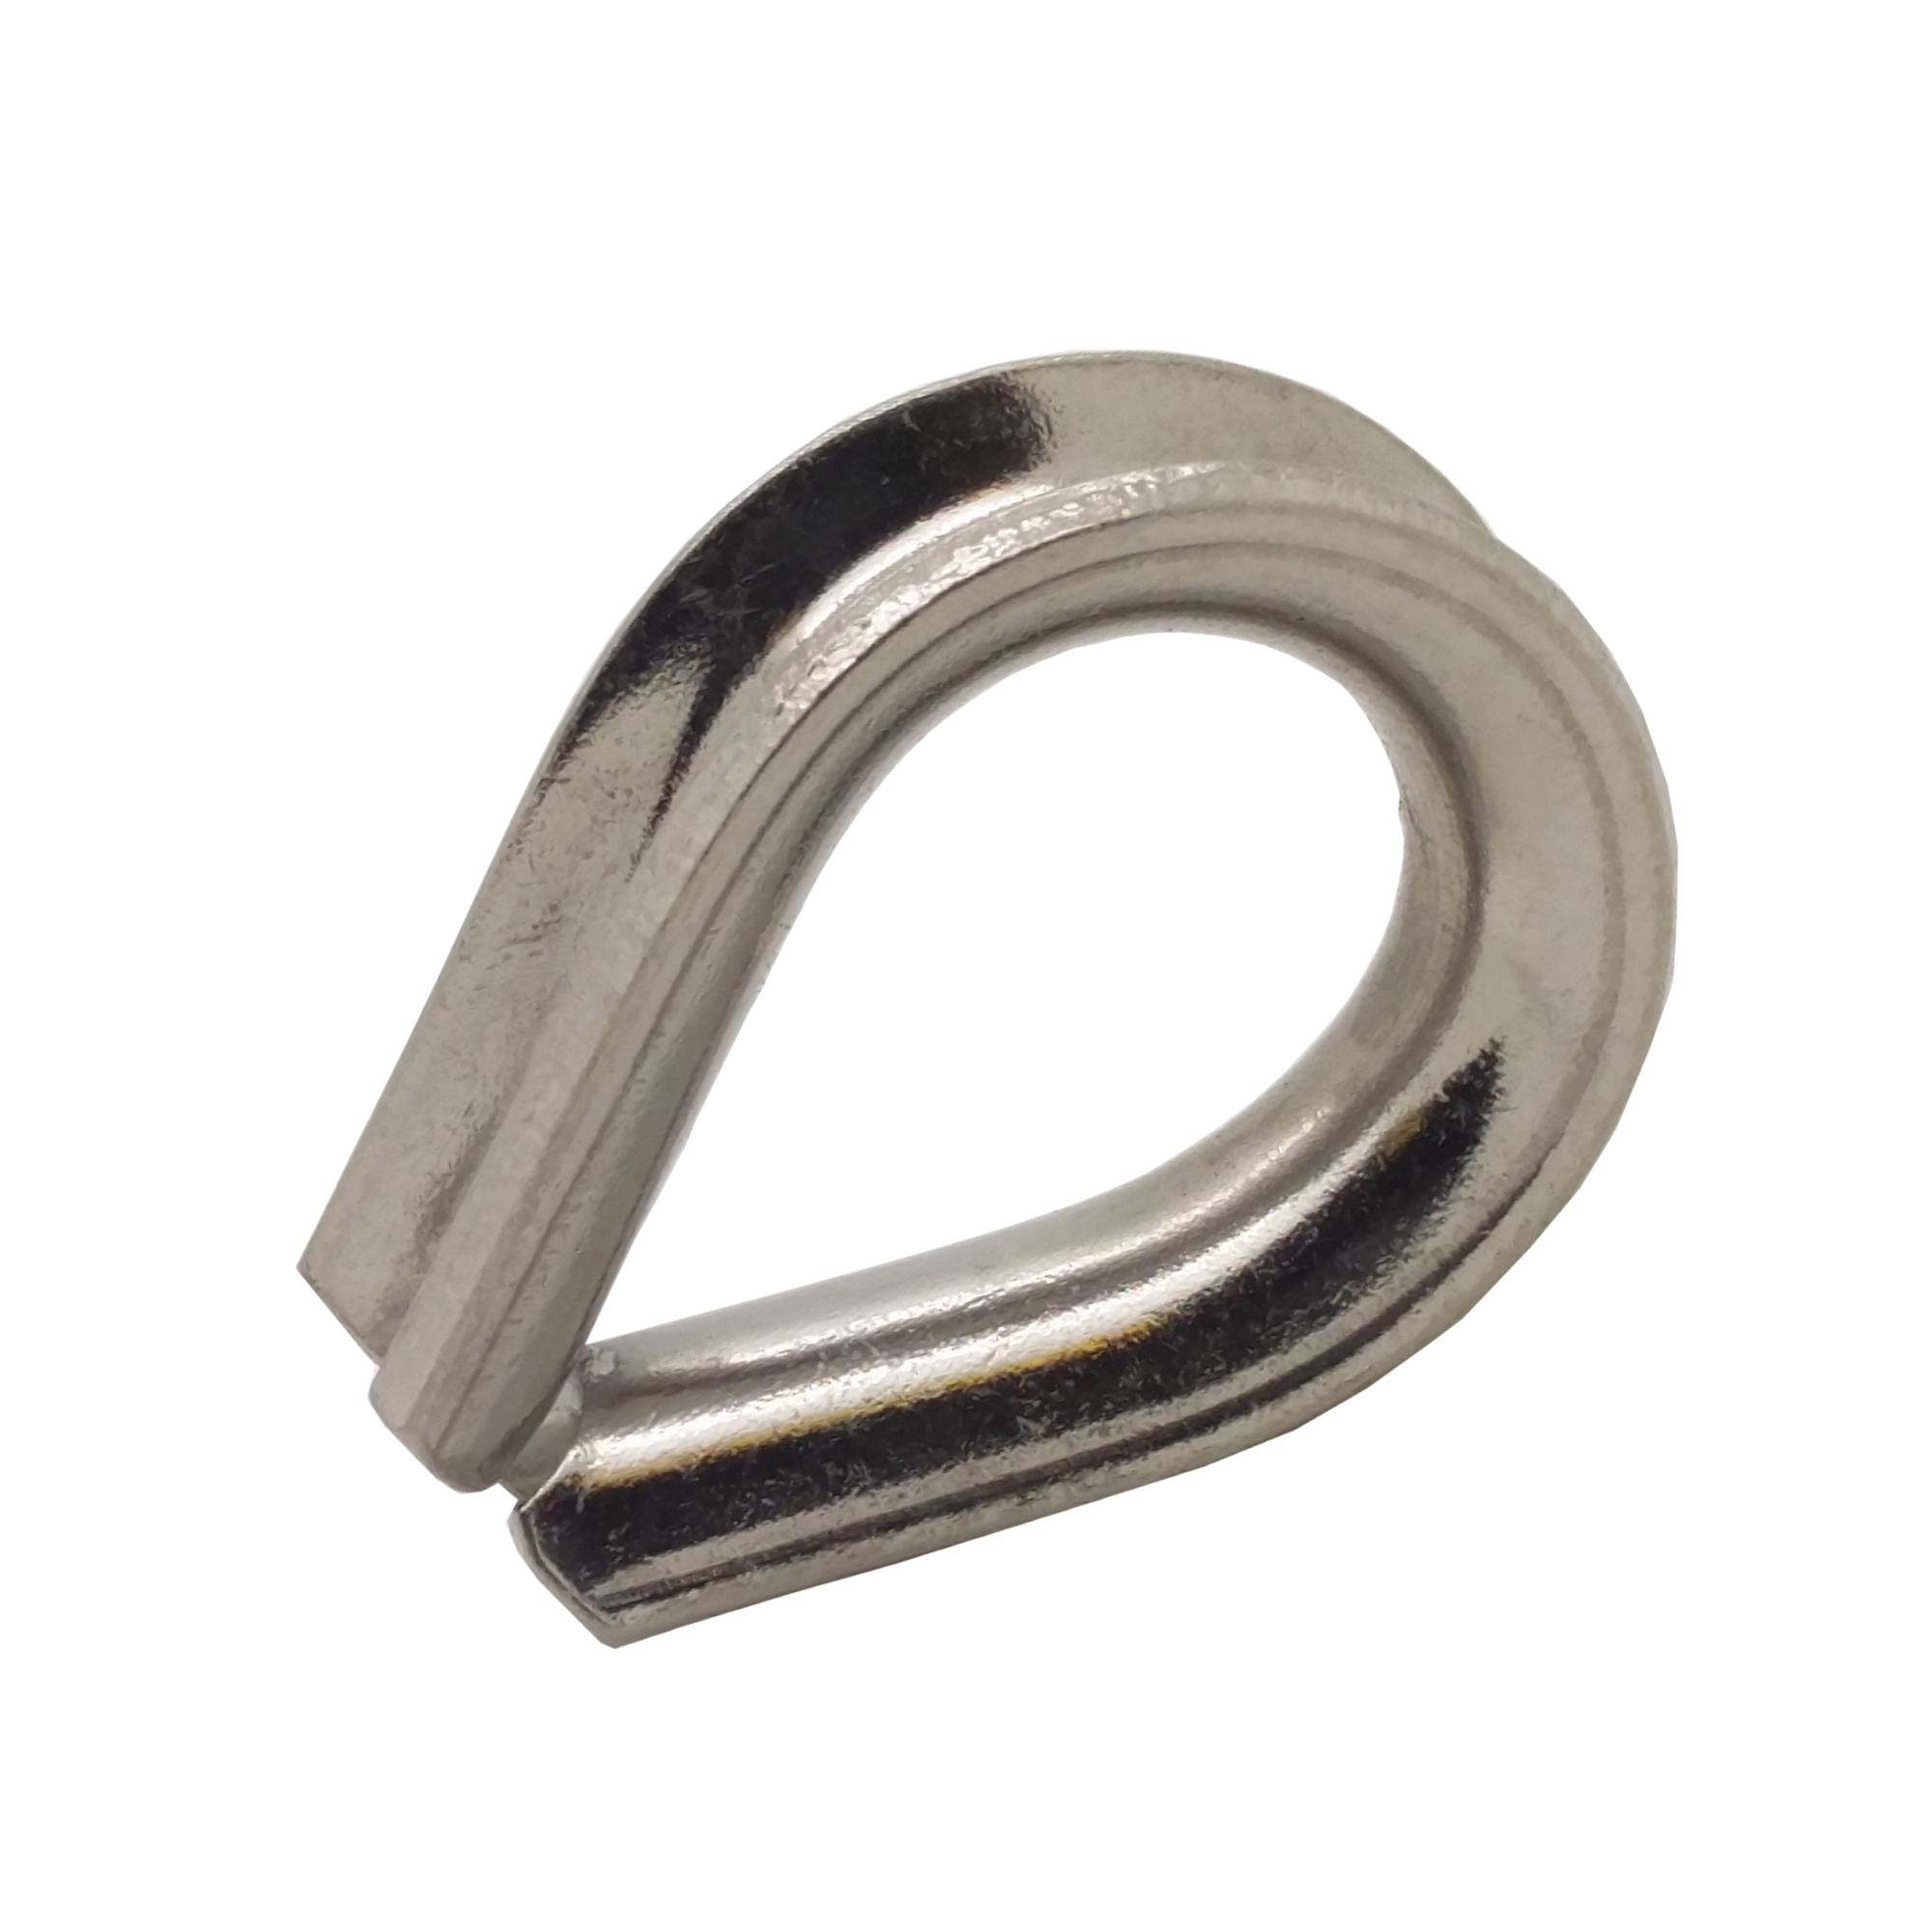 4mm Stainless Steel Wire Rope Thimble Heavy Gauge